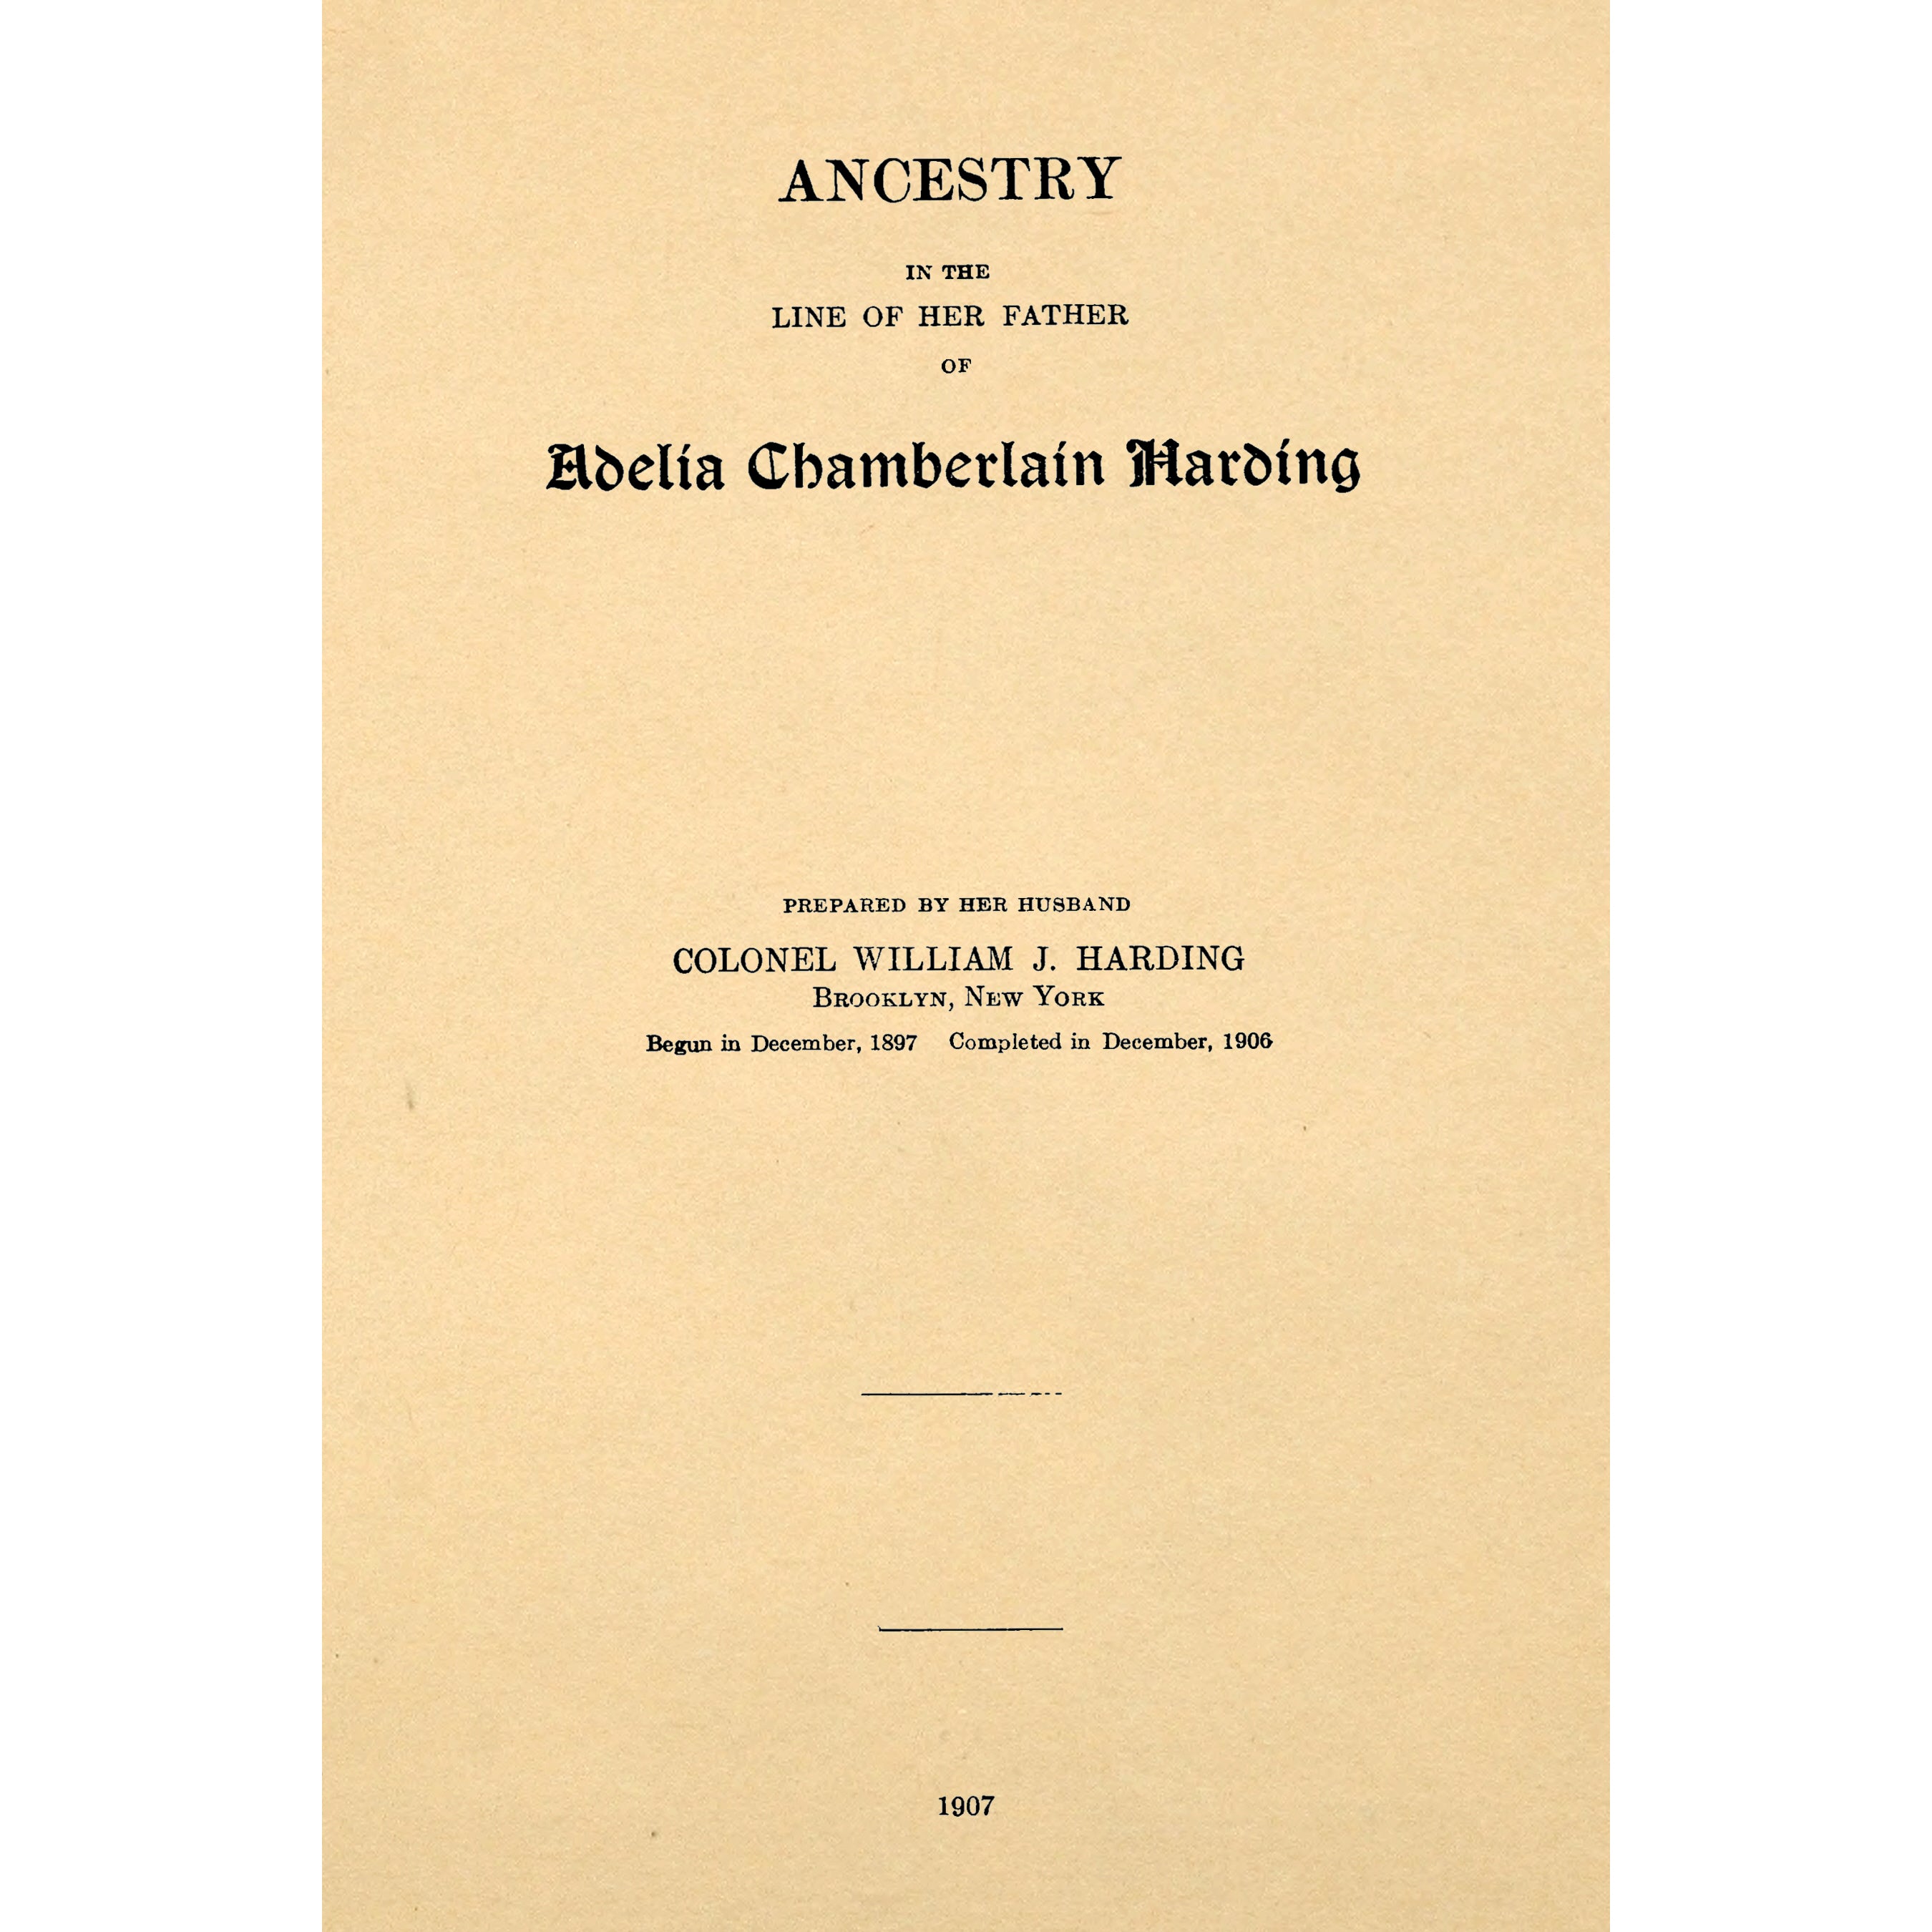 Ancestry in the line of her father of Adelia Chamberlain Harding : daughter of Rev. Hiram Chamberlain and Anna Adelia Griswold